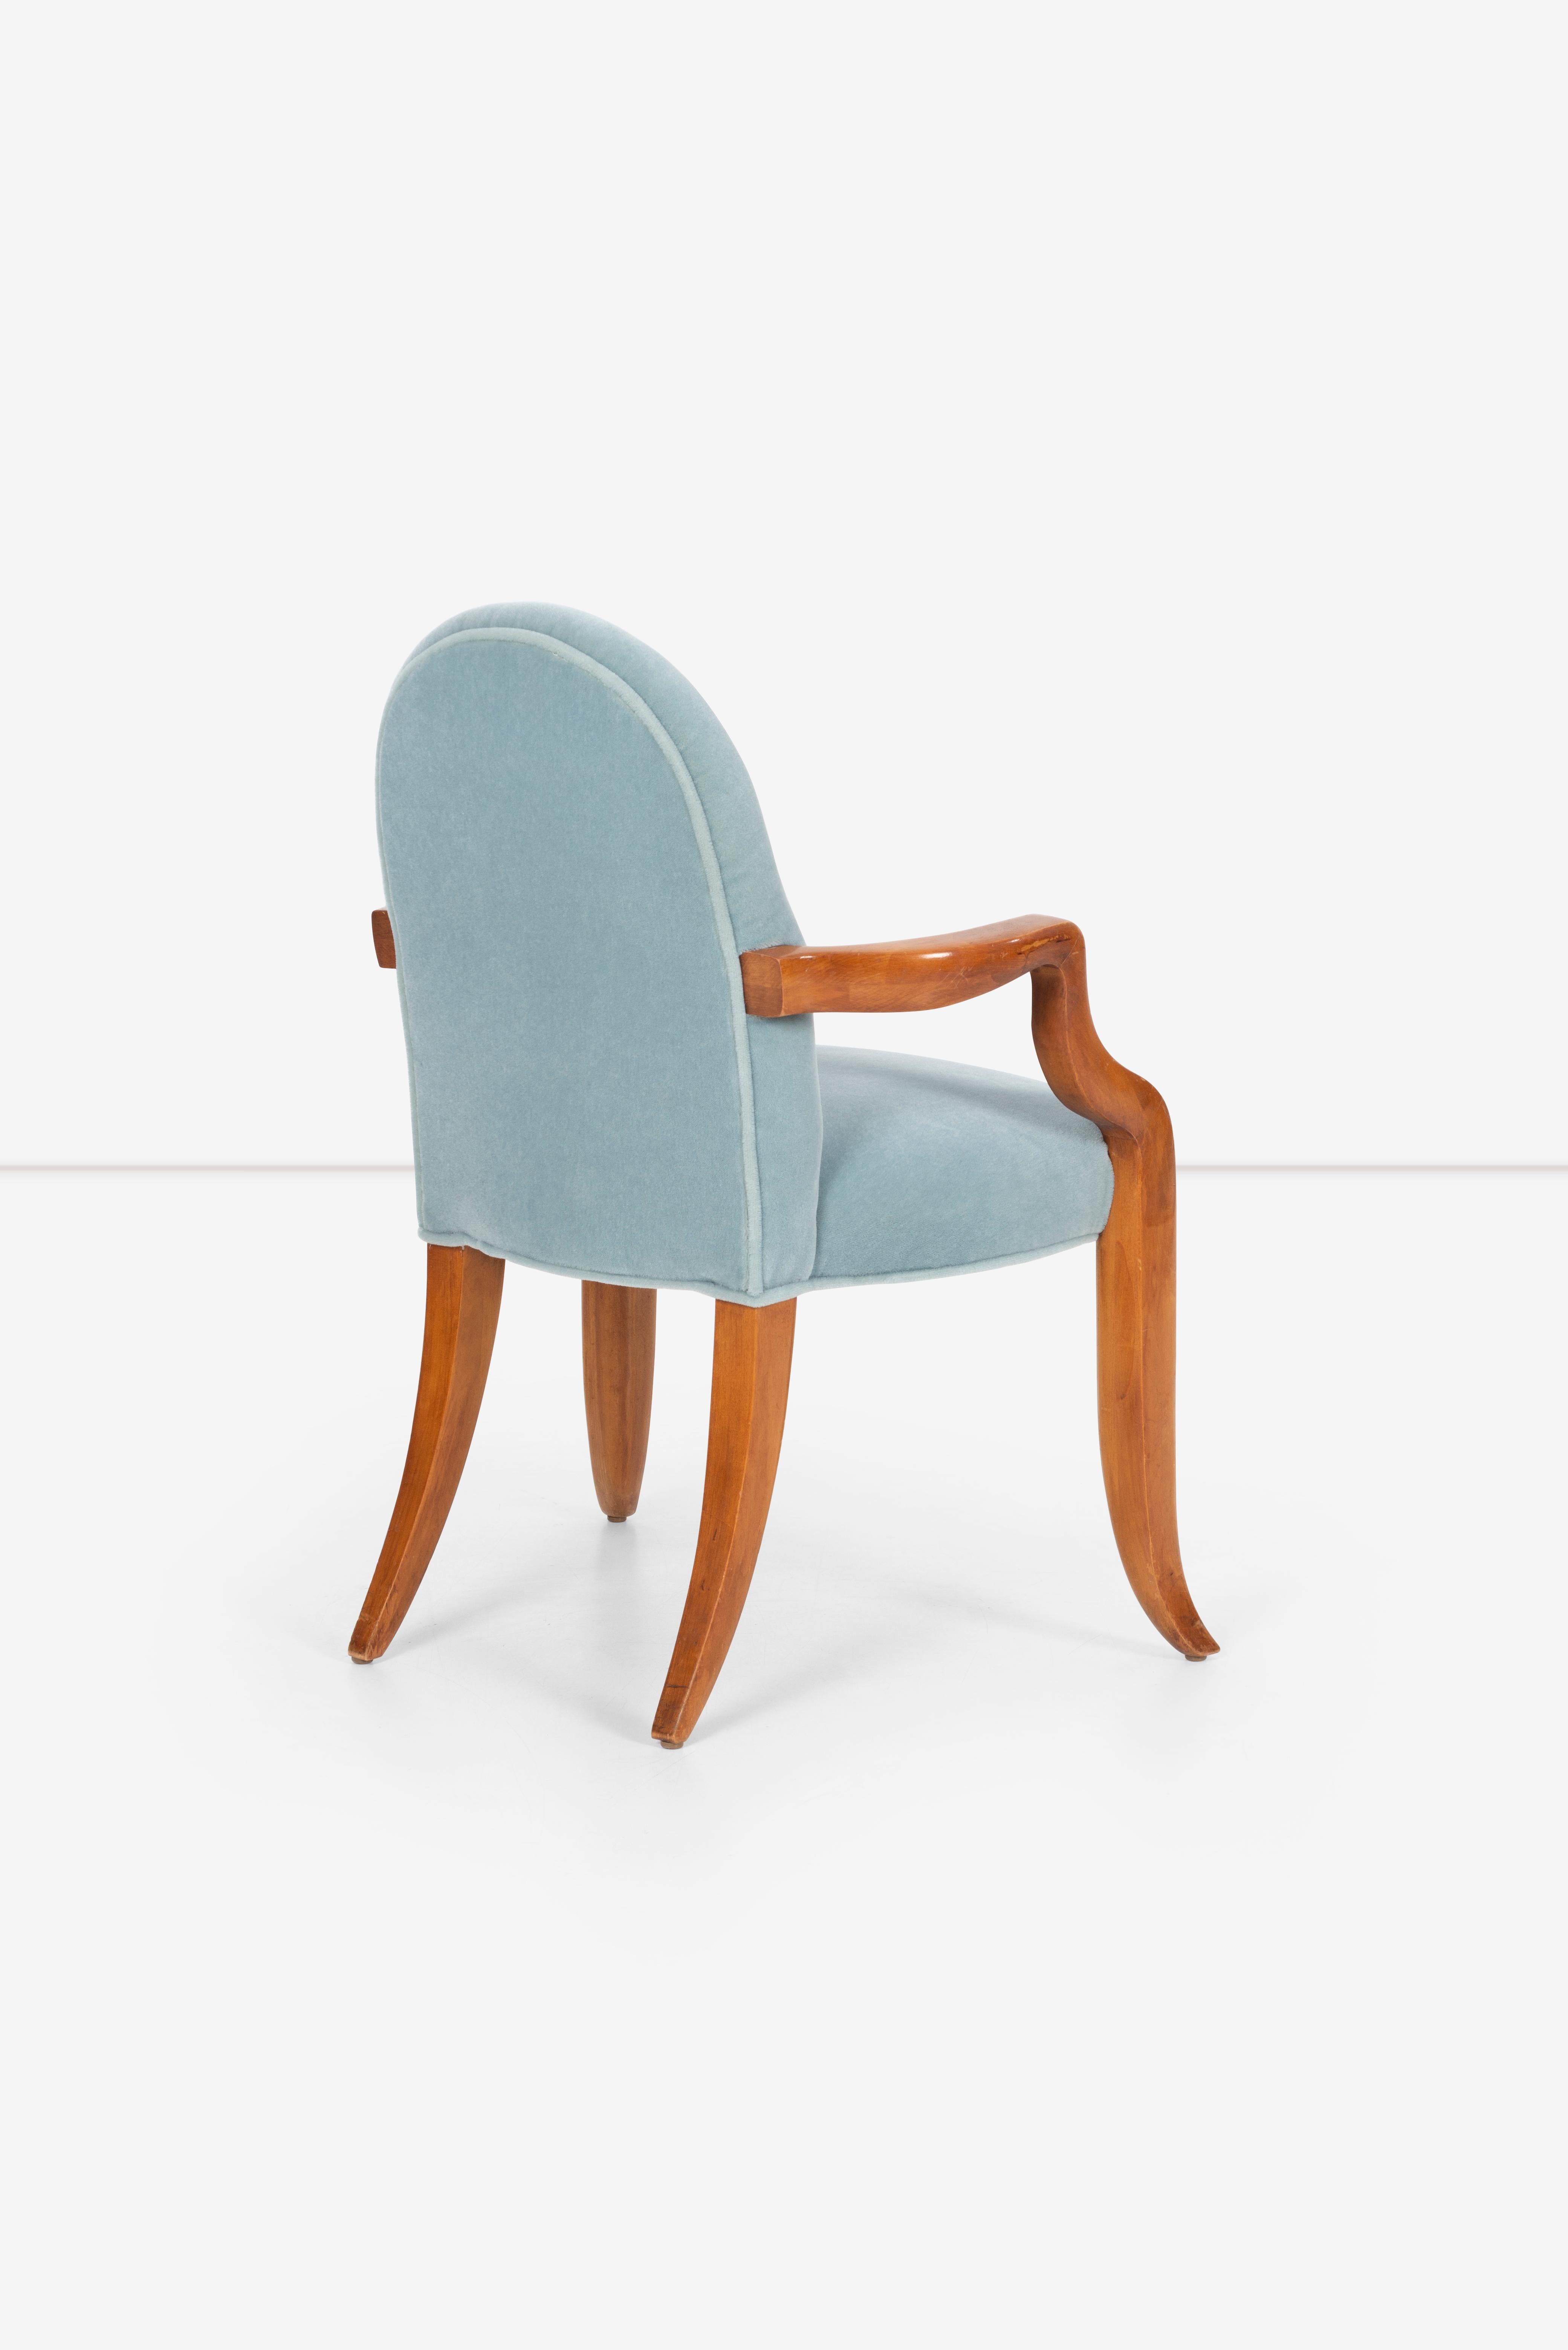 Post-Modern Wendell Castle Accent Chair For Sale